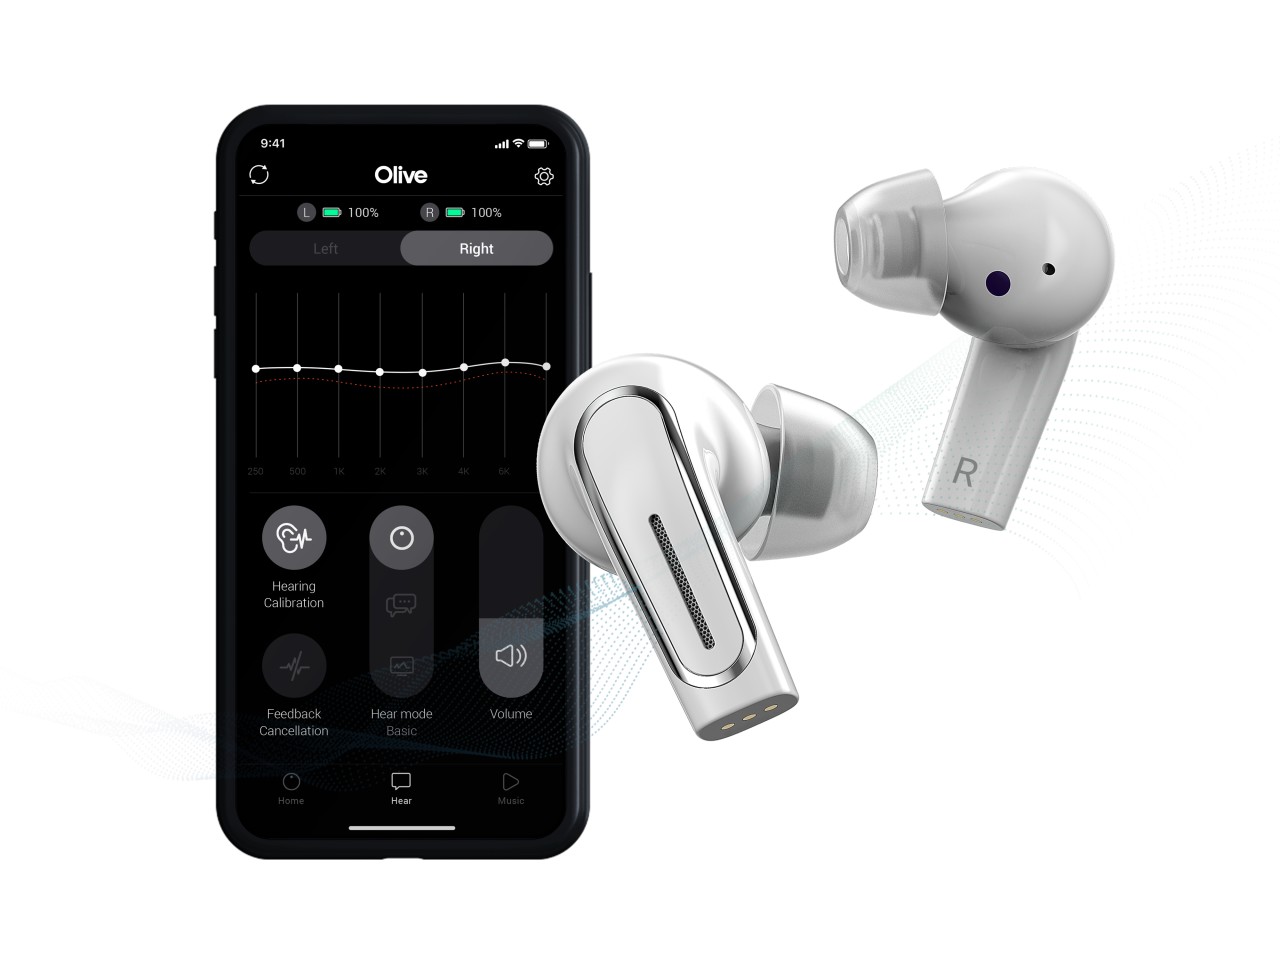 The Olive Pro is FDA-registered as a hearing aid, and allows you to create a personalized hearing profile